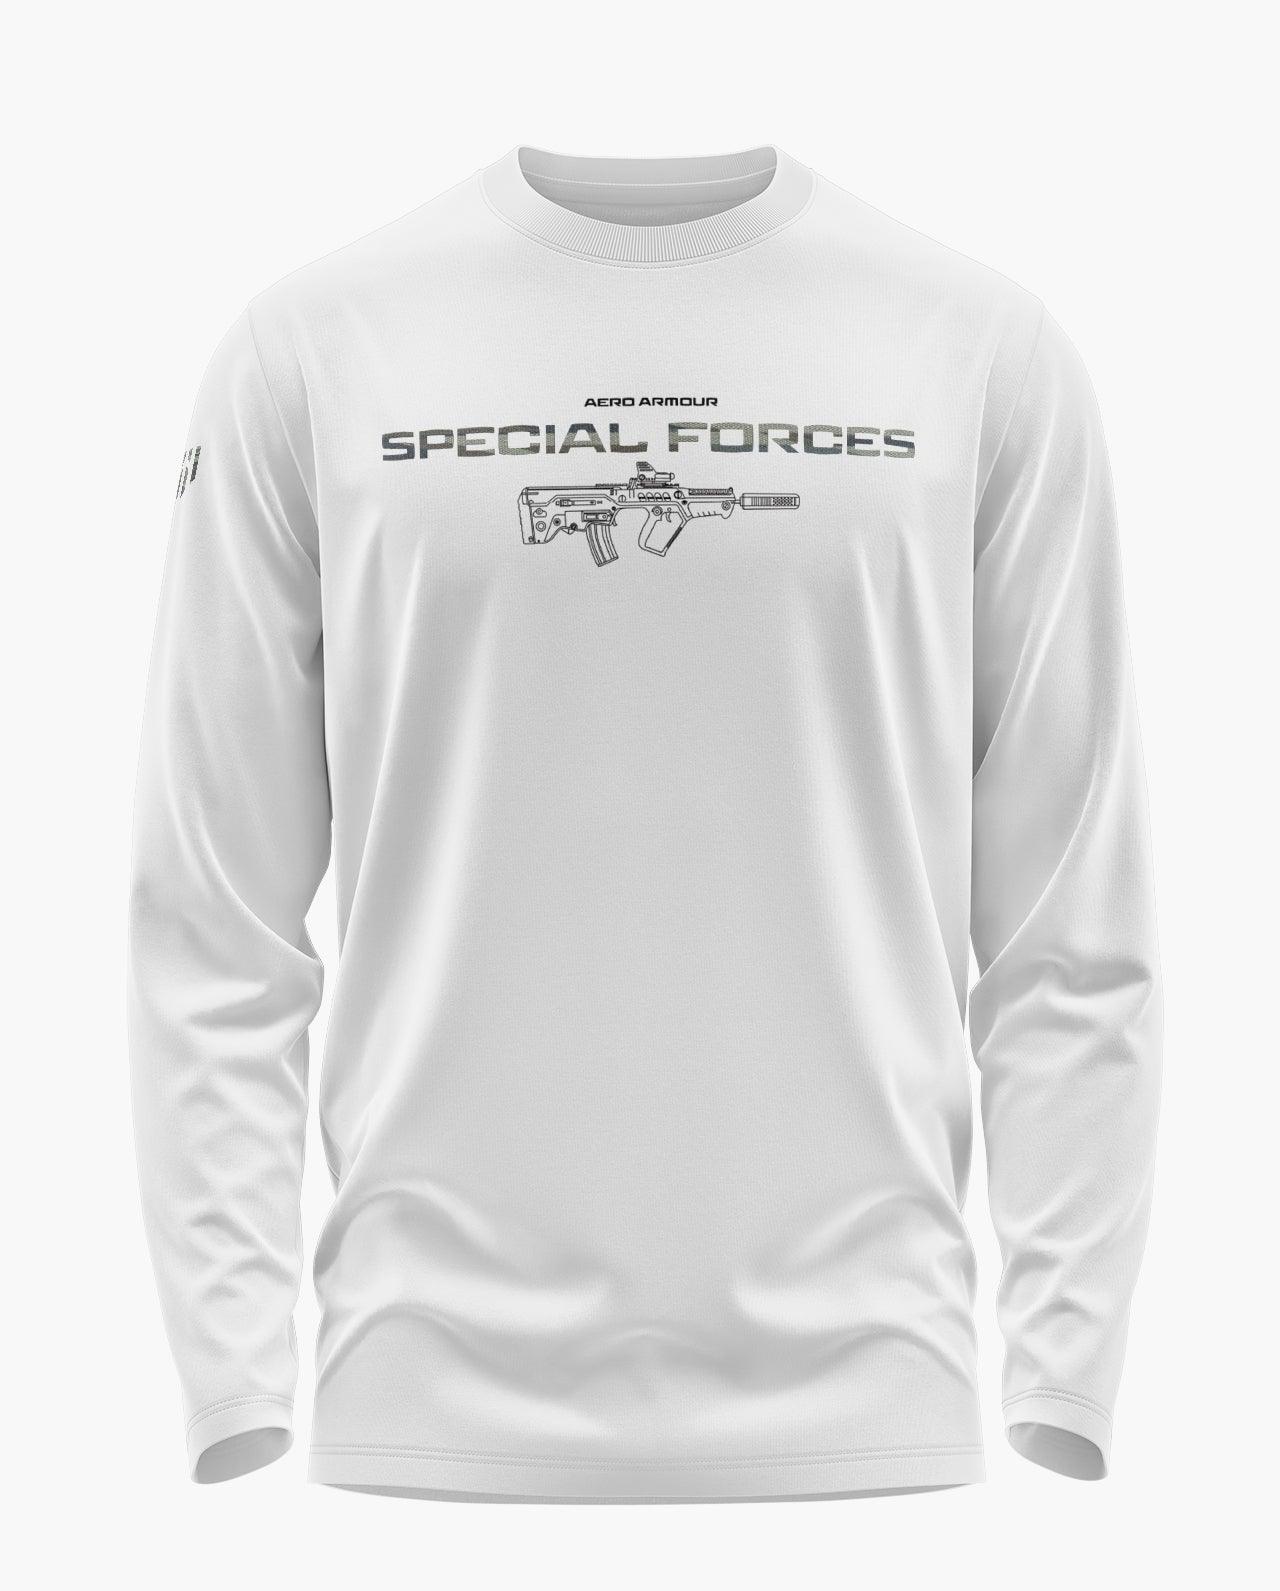 Special Forces Full Sleeve T-Shirt - Aero Armour